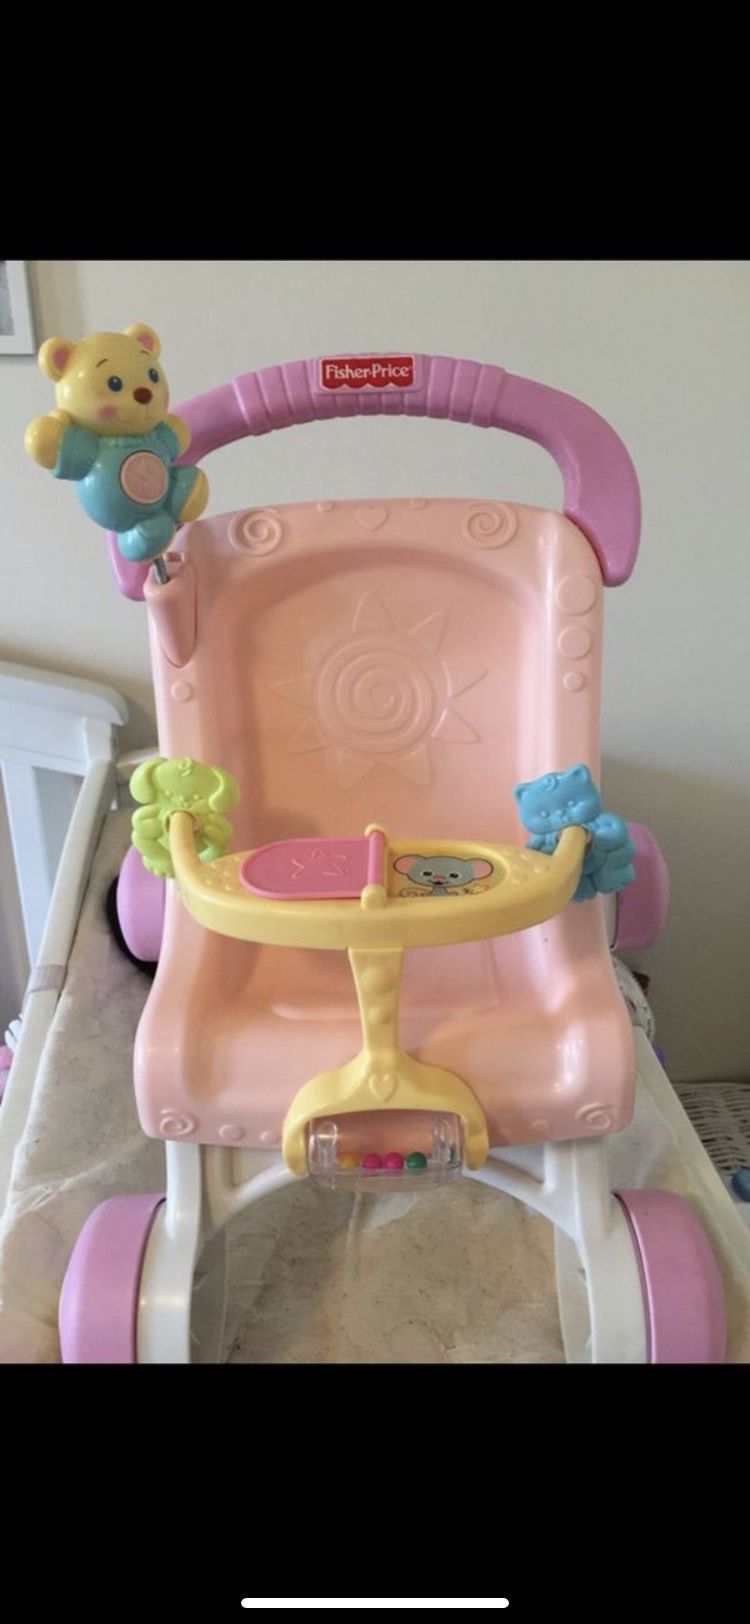 Fisher price stroller for baby